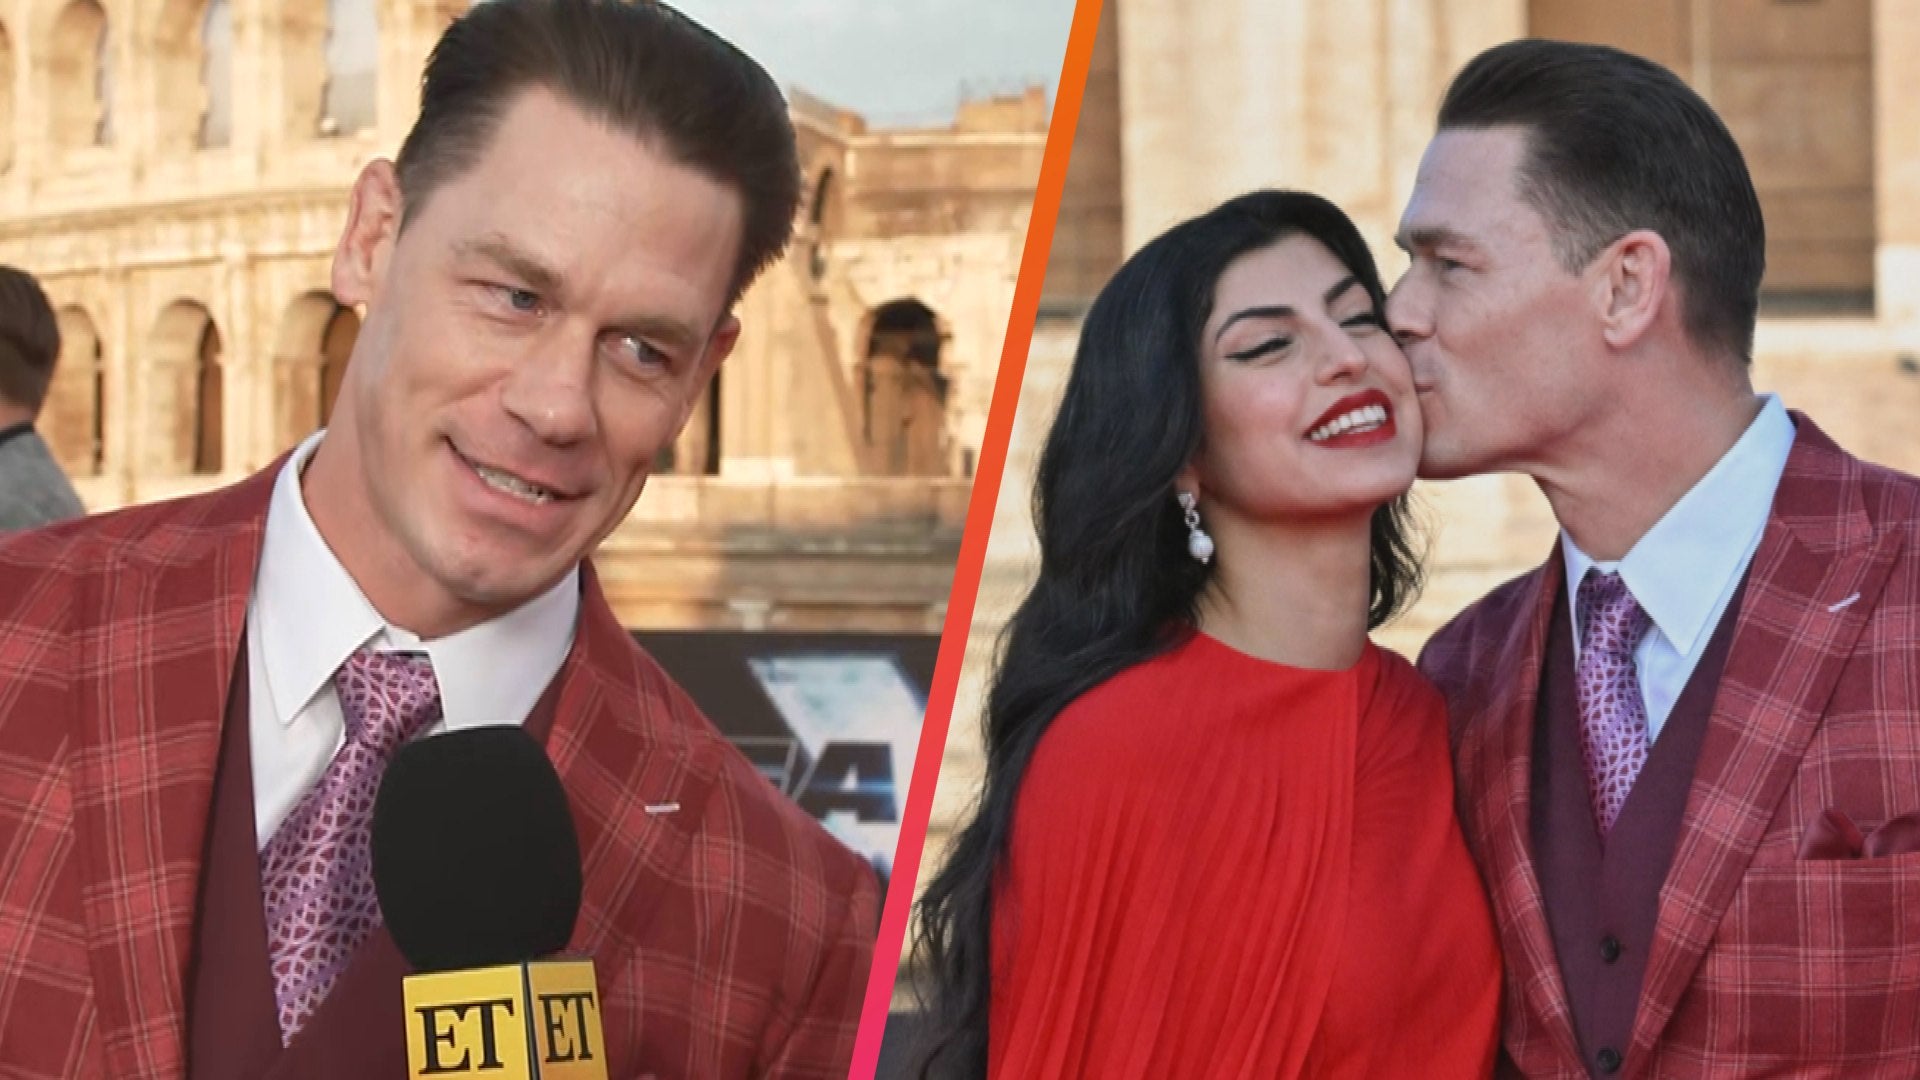 John Cena Praises Wife Shay Shariatzadeh as the Brains Behind This Operation (Exclusive) Entertainment Tonight